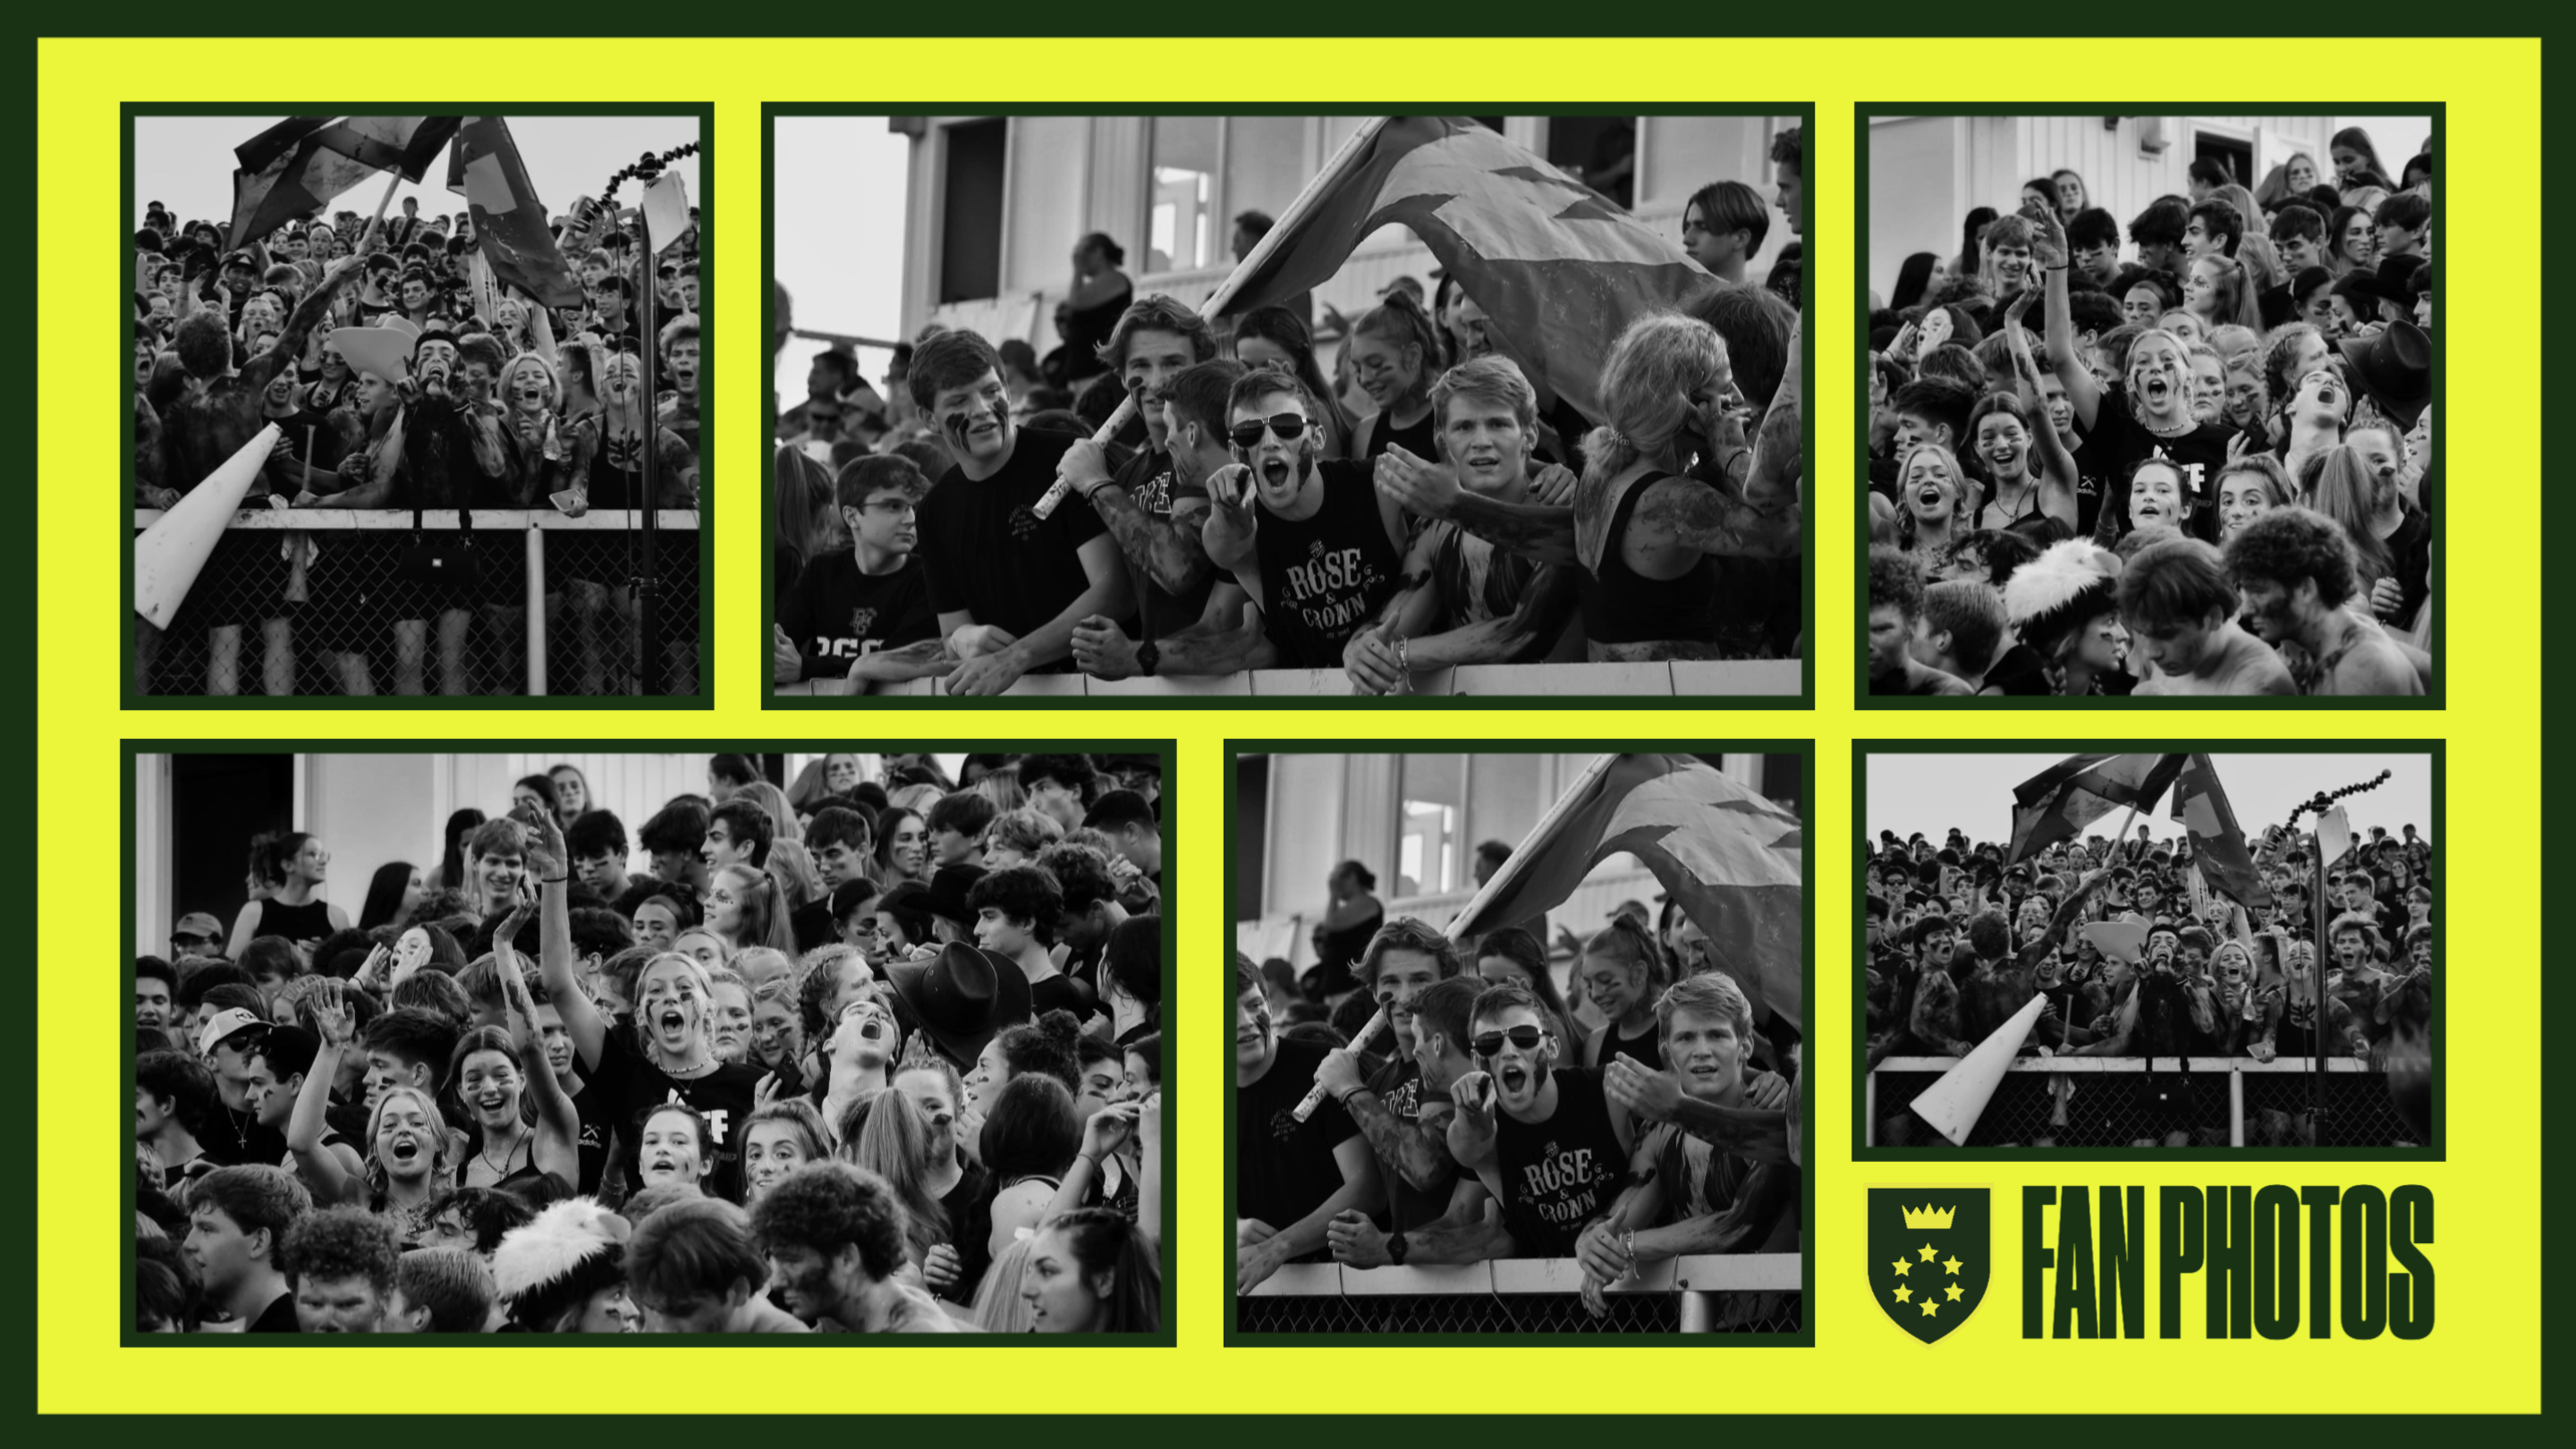 Gipper's Fan Photos graphic template featuring a collage of six black and white photos of cheering fans set against a yellow background